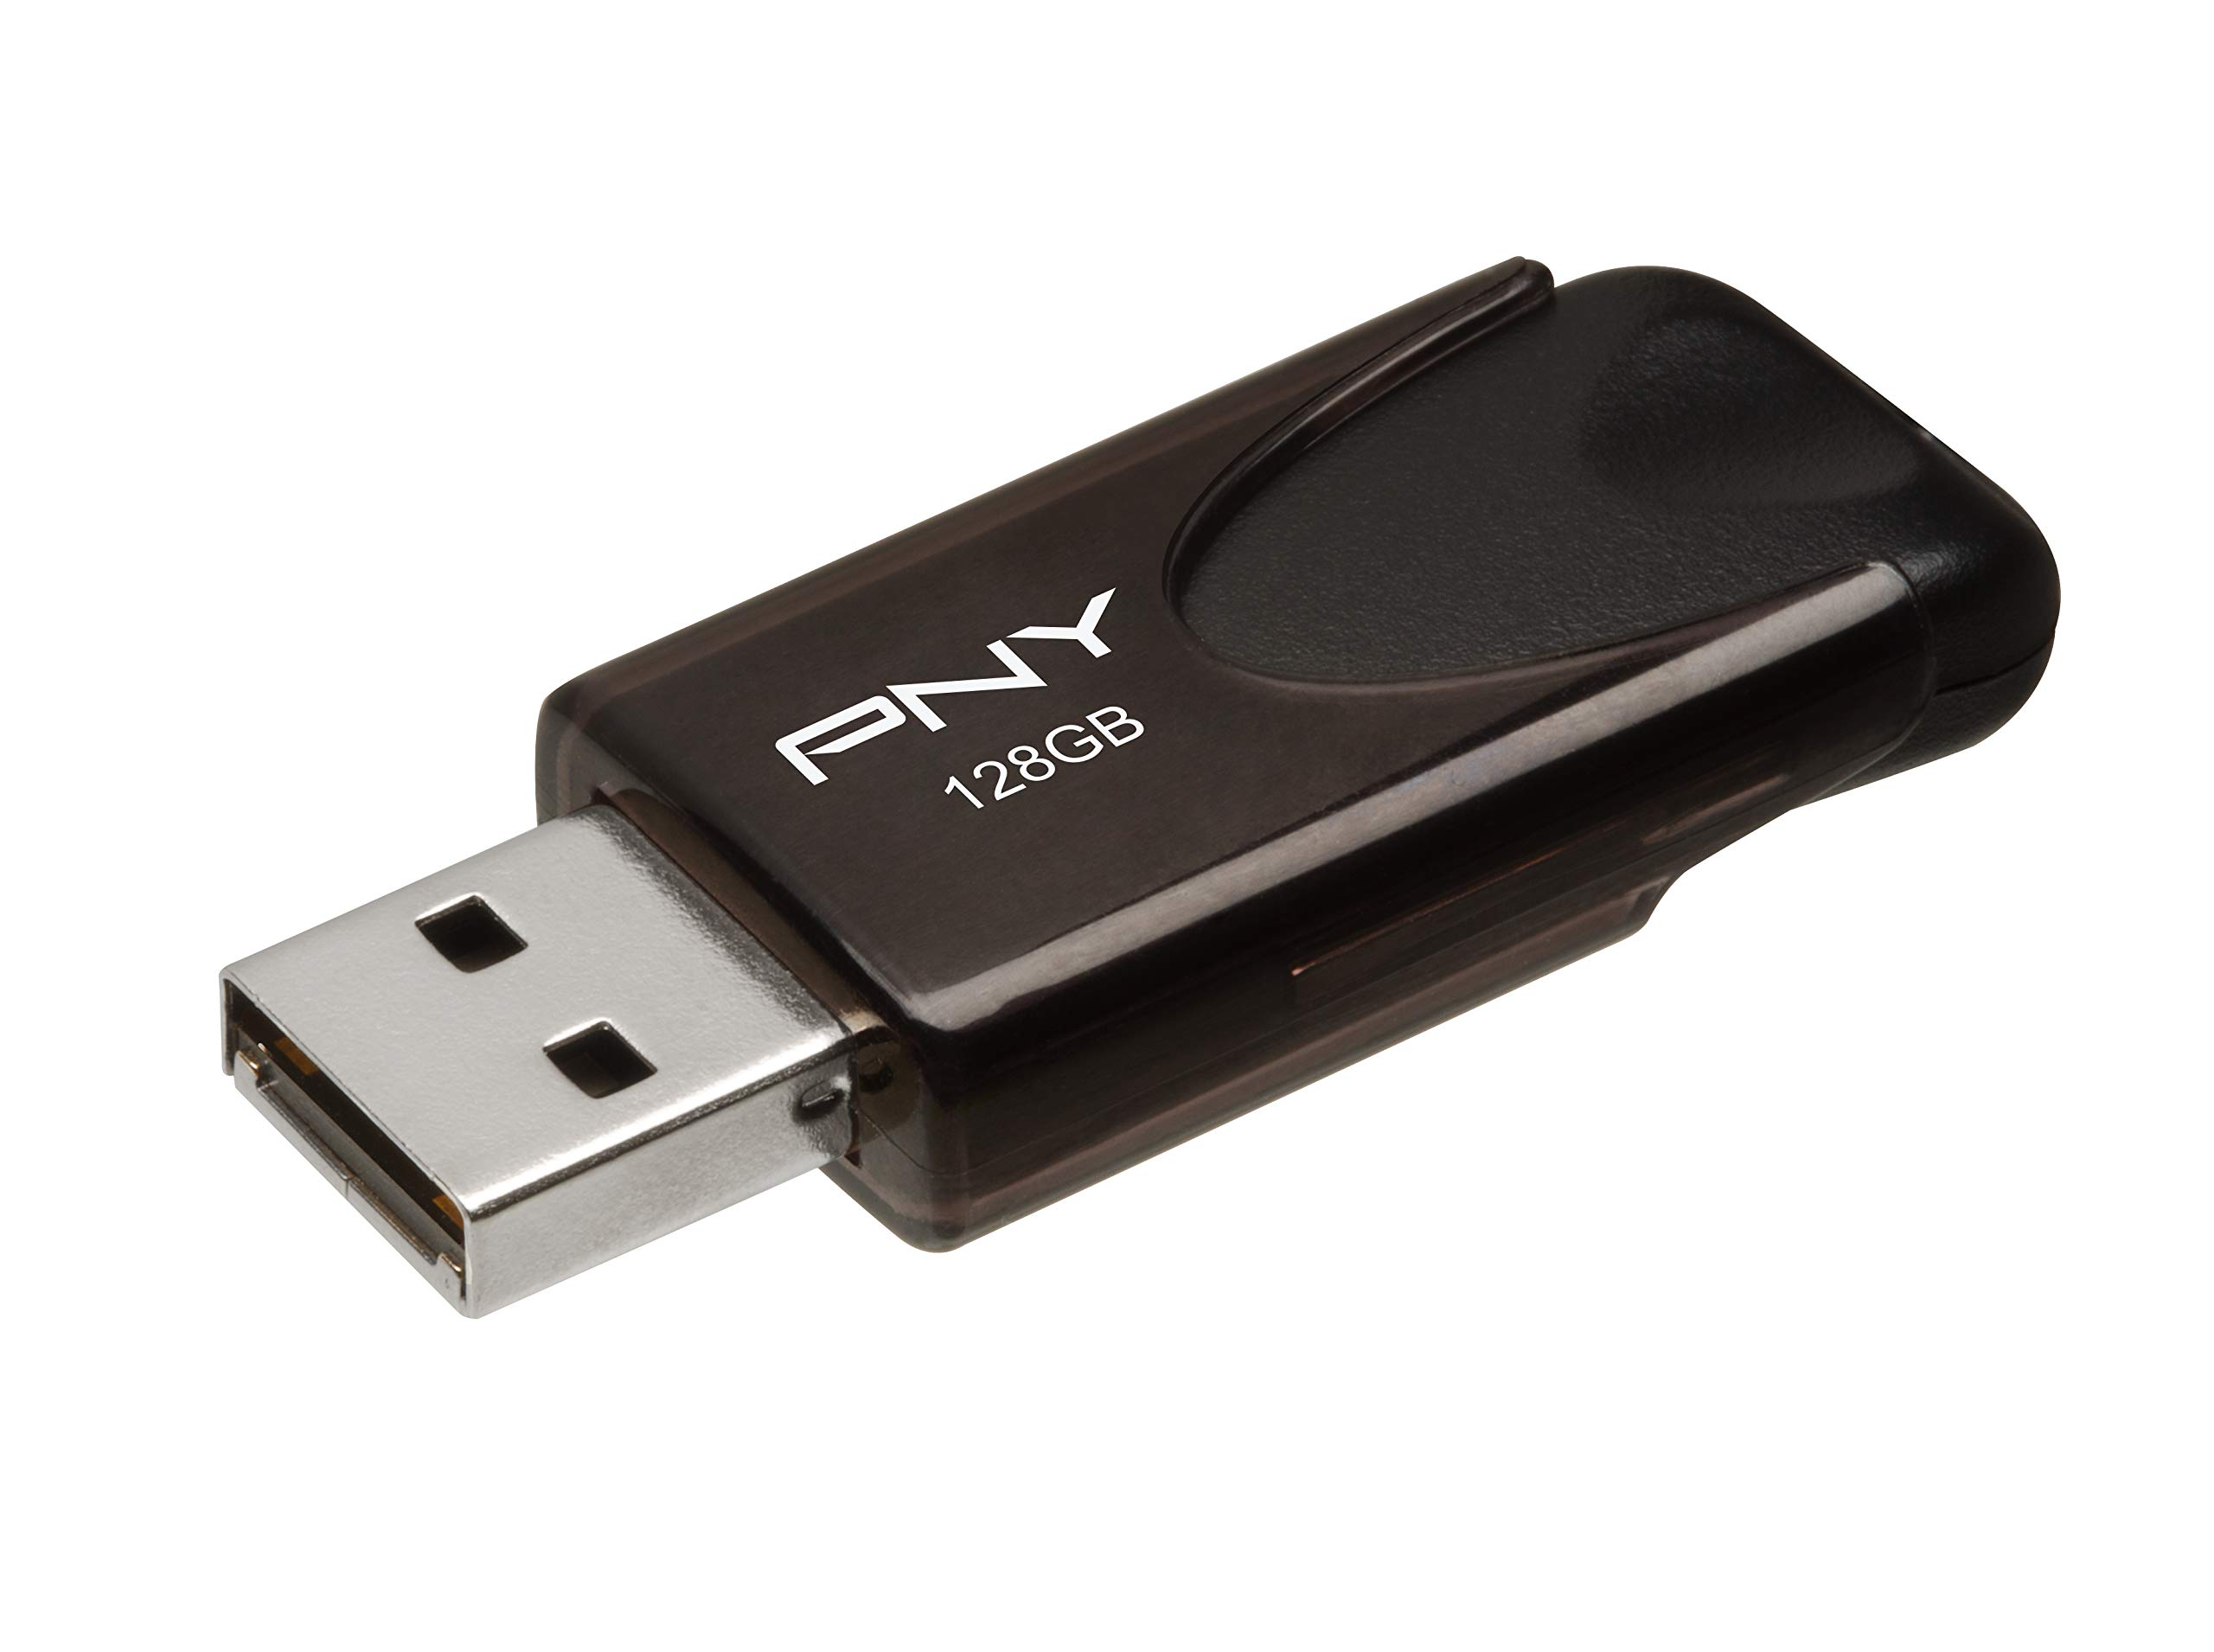 128GB PNY Attaché 4 USB 2.0 Flash Drive $4 + Free Shipping w/ Prime or on $35+